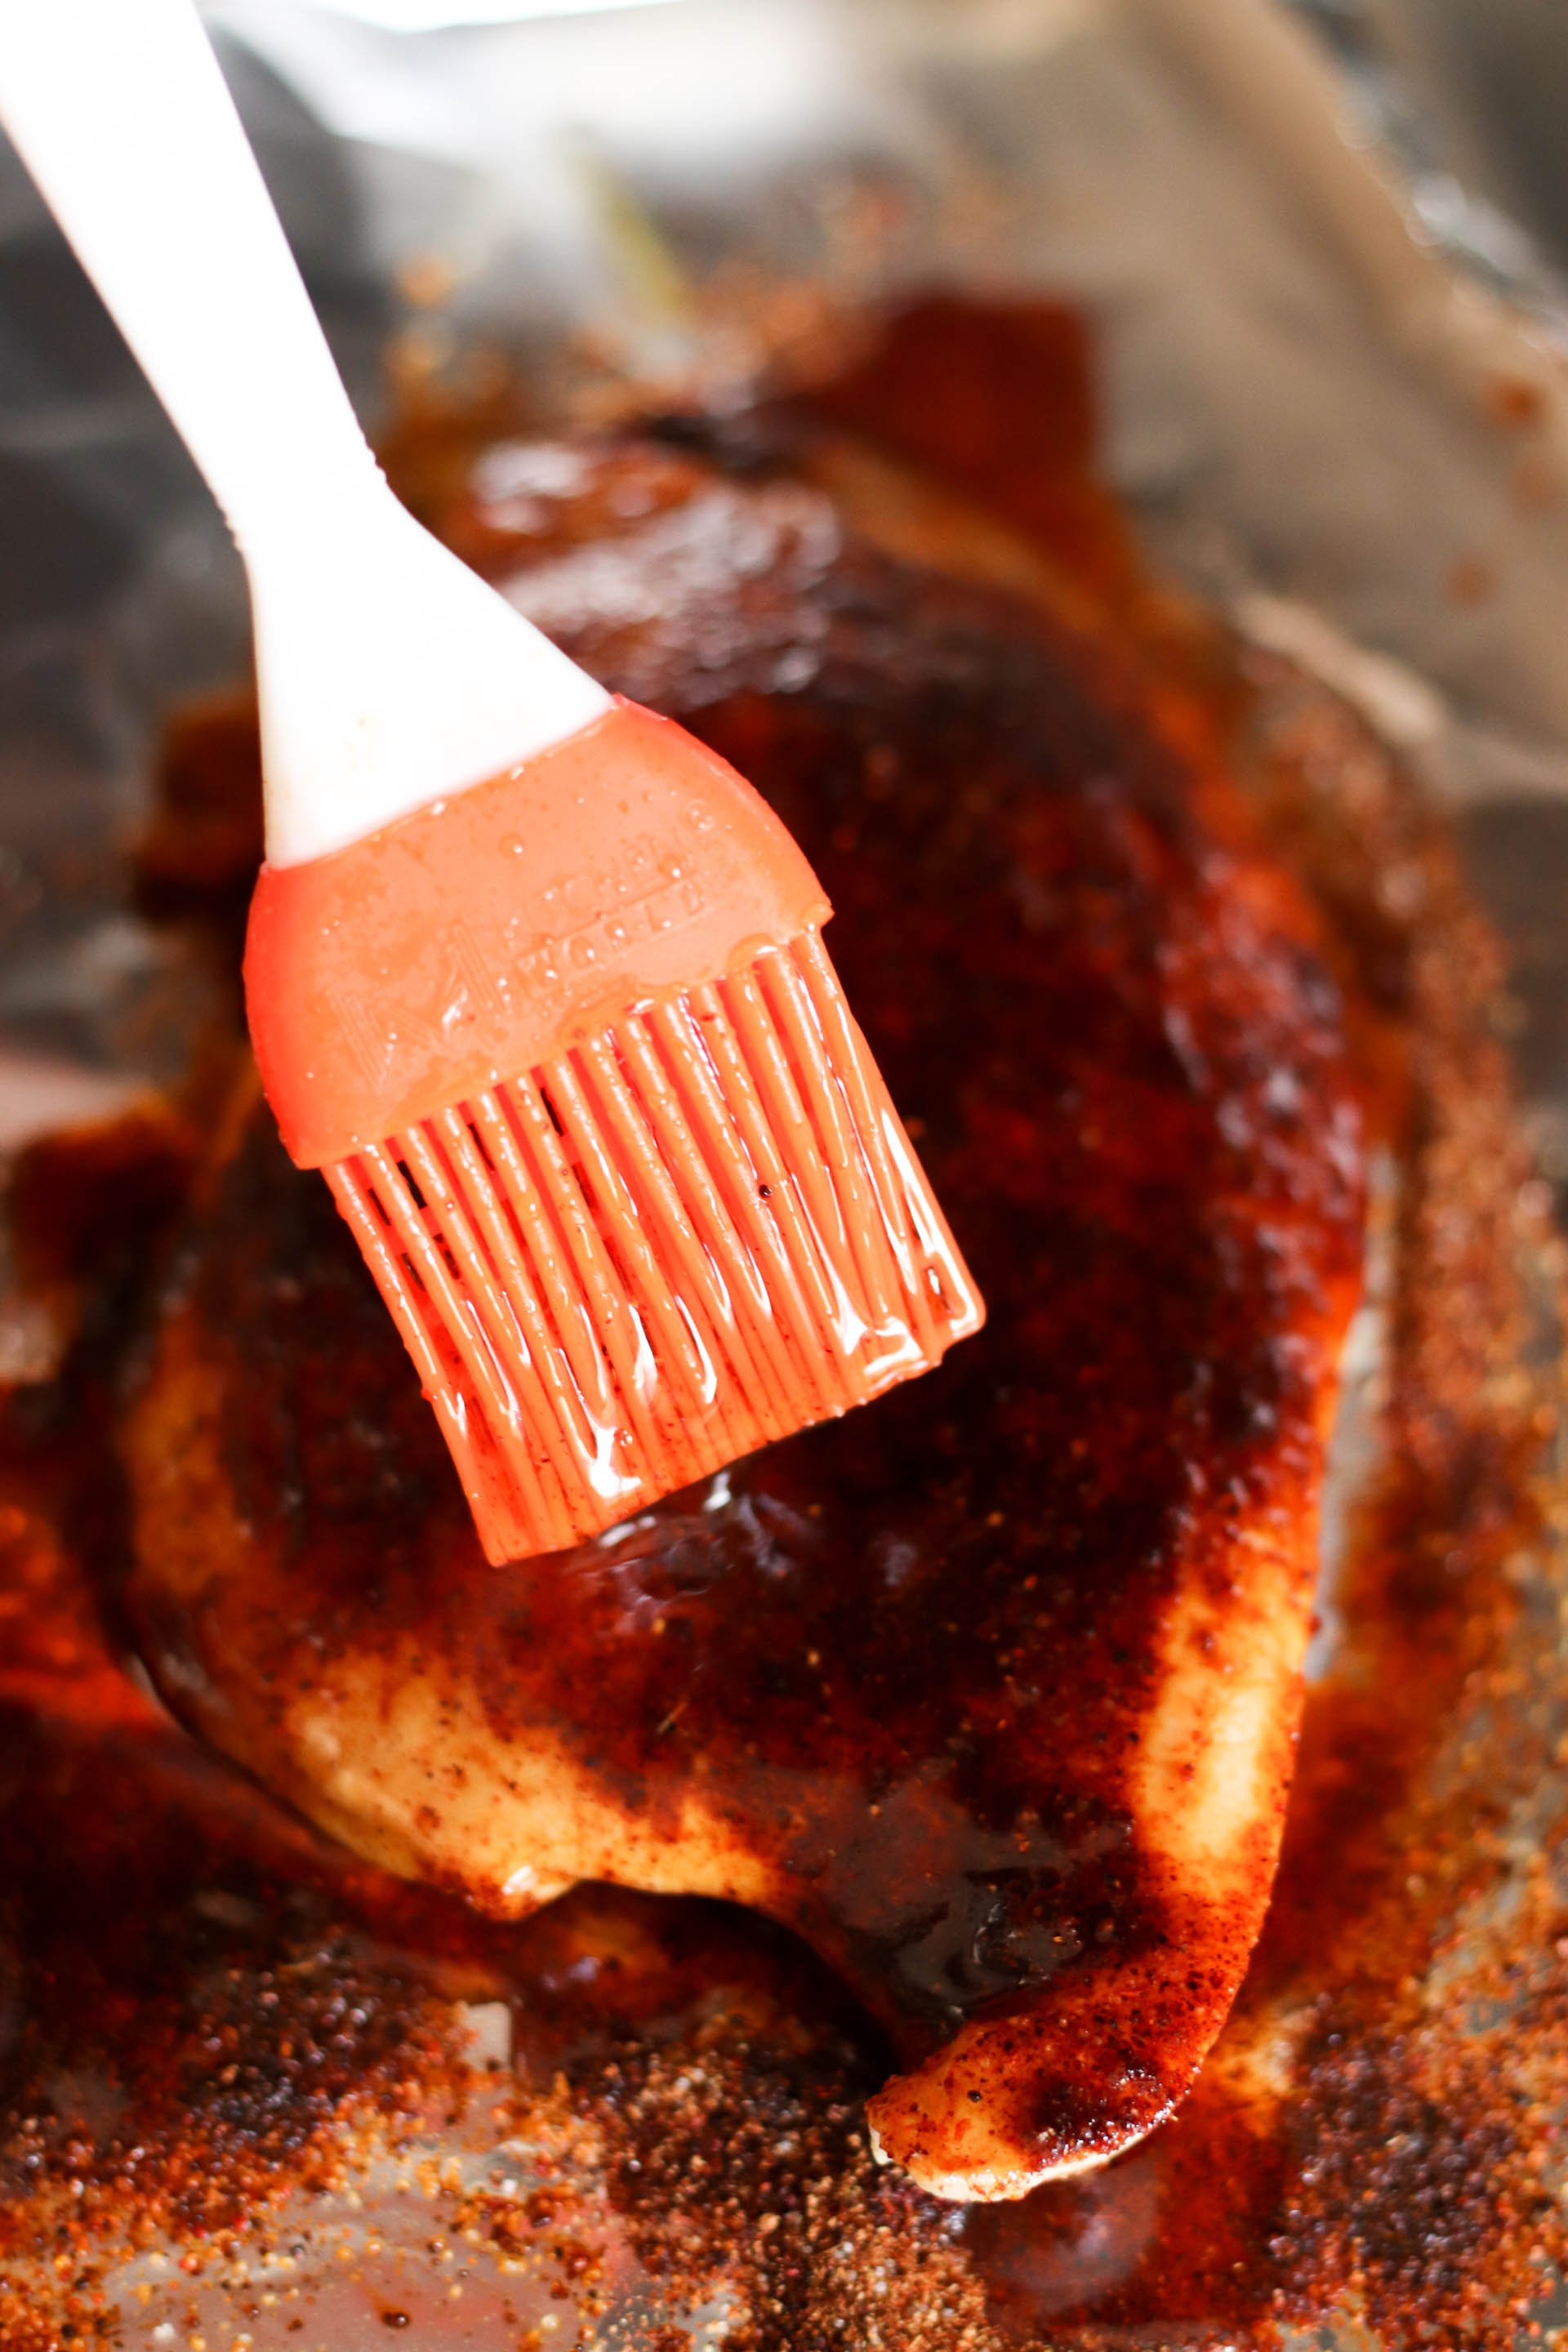 Brushing the glaze on the grilled chicken